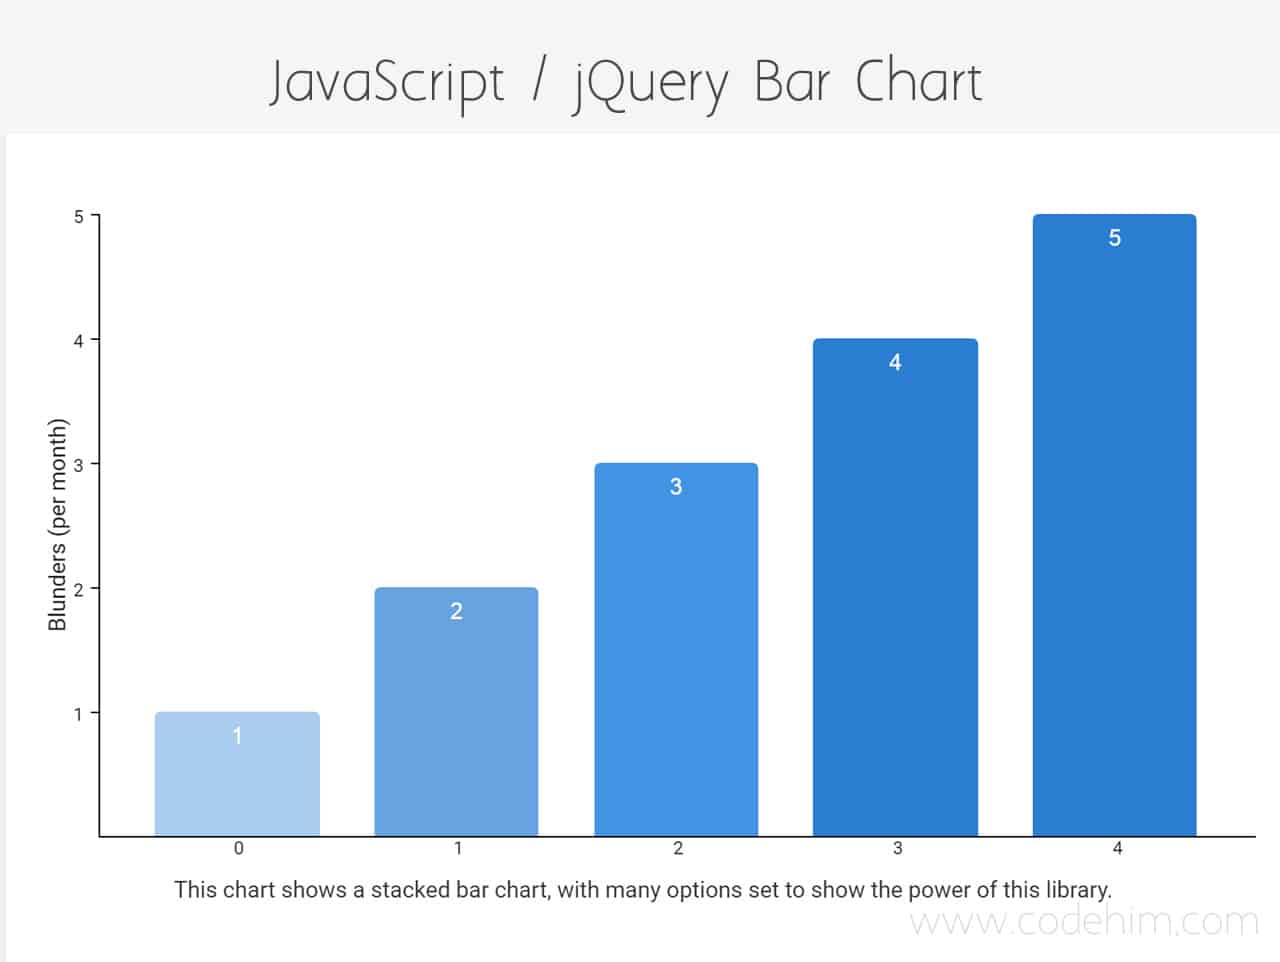 Bar Chart in HTML using JavaScript / jQuery and CSS